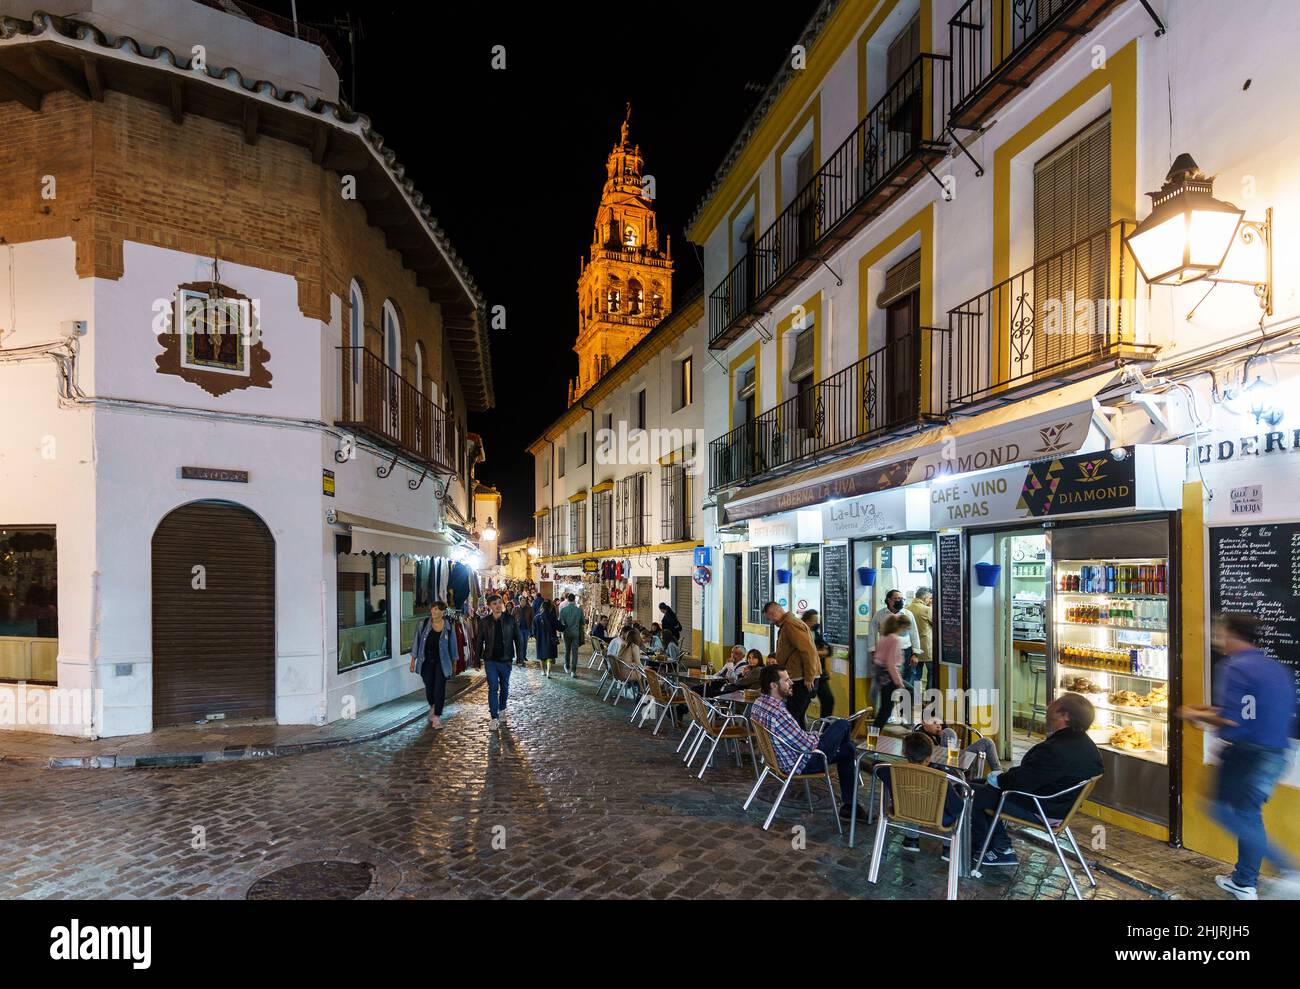 Cordoba, Spain - November 13 2021: People have a drink and food in the Jewish Quarter, the Juderia, in Cordoba old town in Andalusia with the cathedra Stock Photo